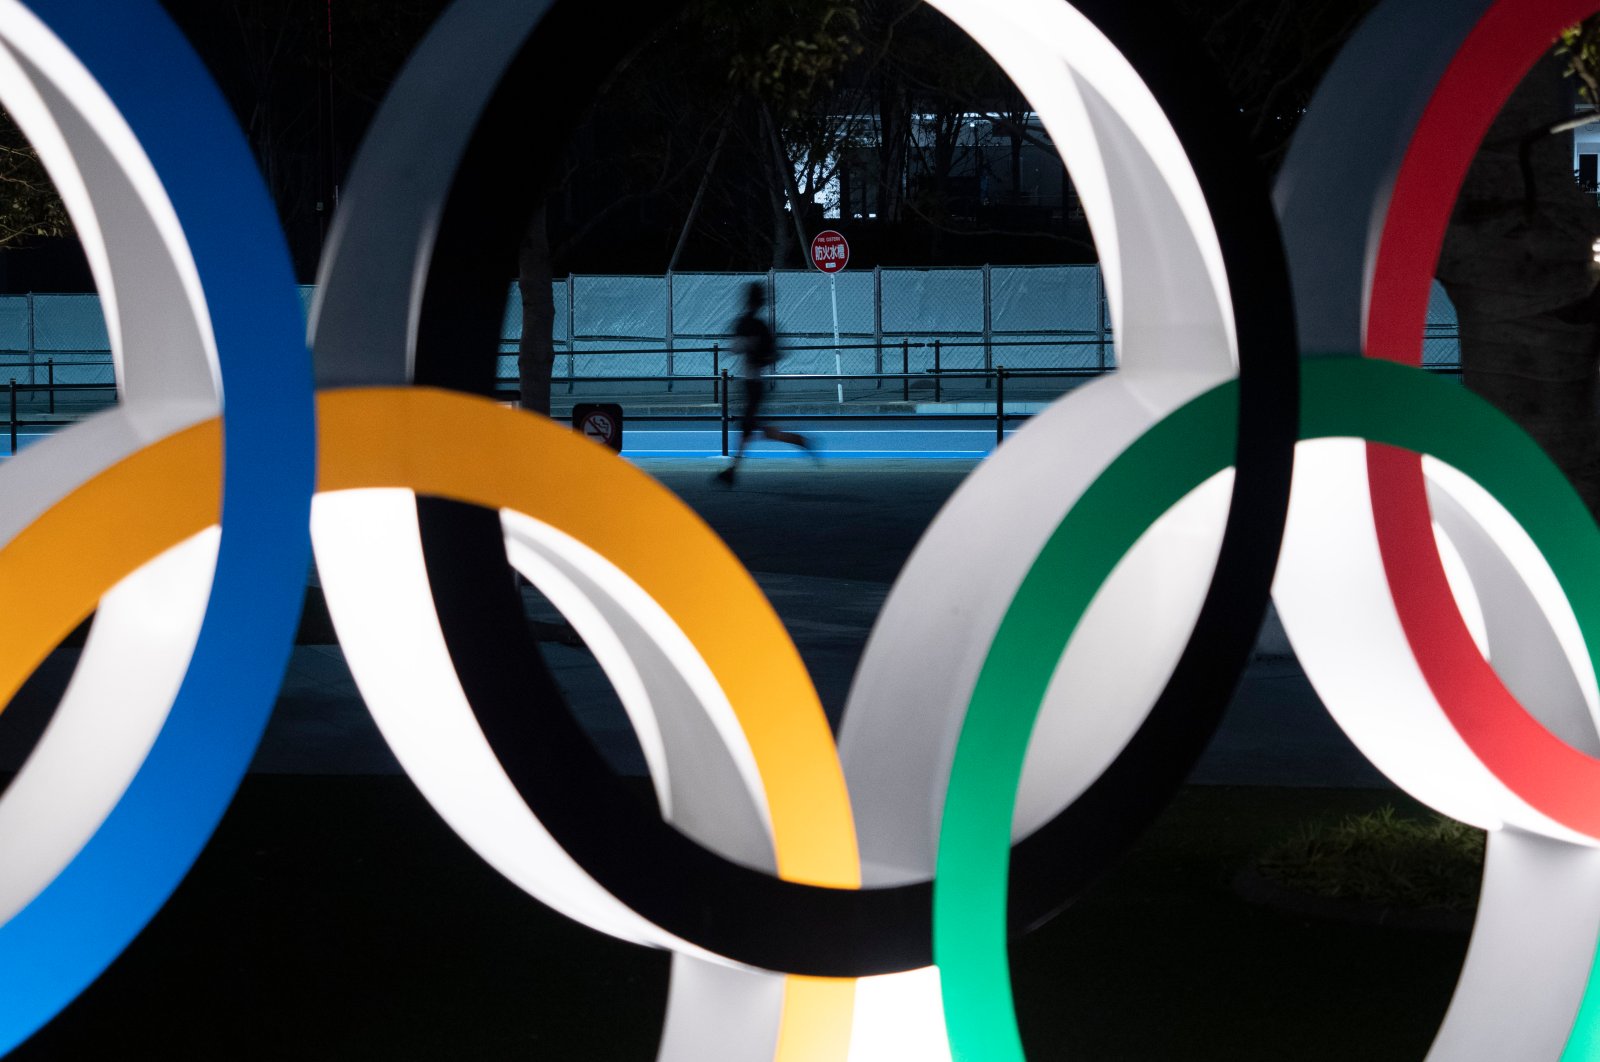 A man jogs past the Olympic rings in Tokyo, Japan, March 30, 2020. (AP Photo)